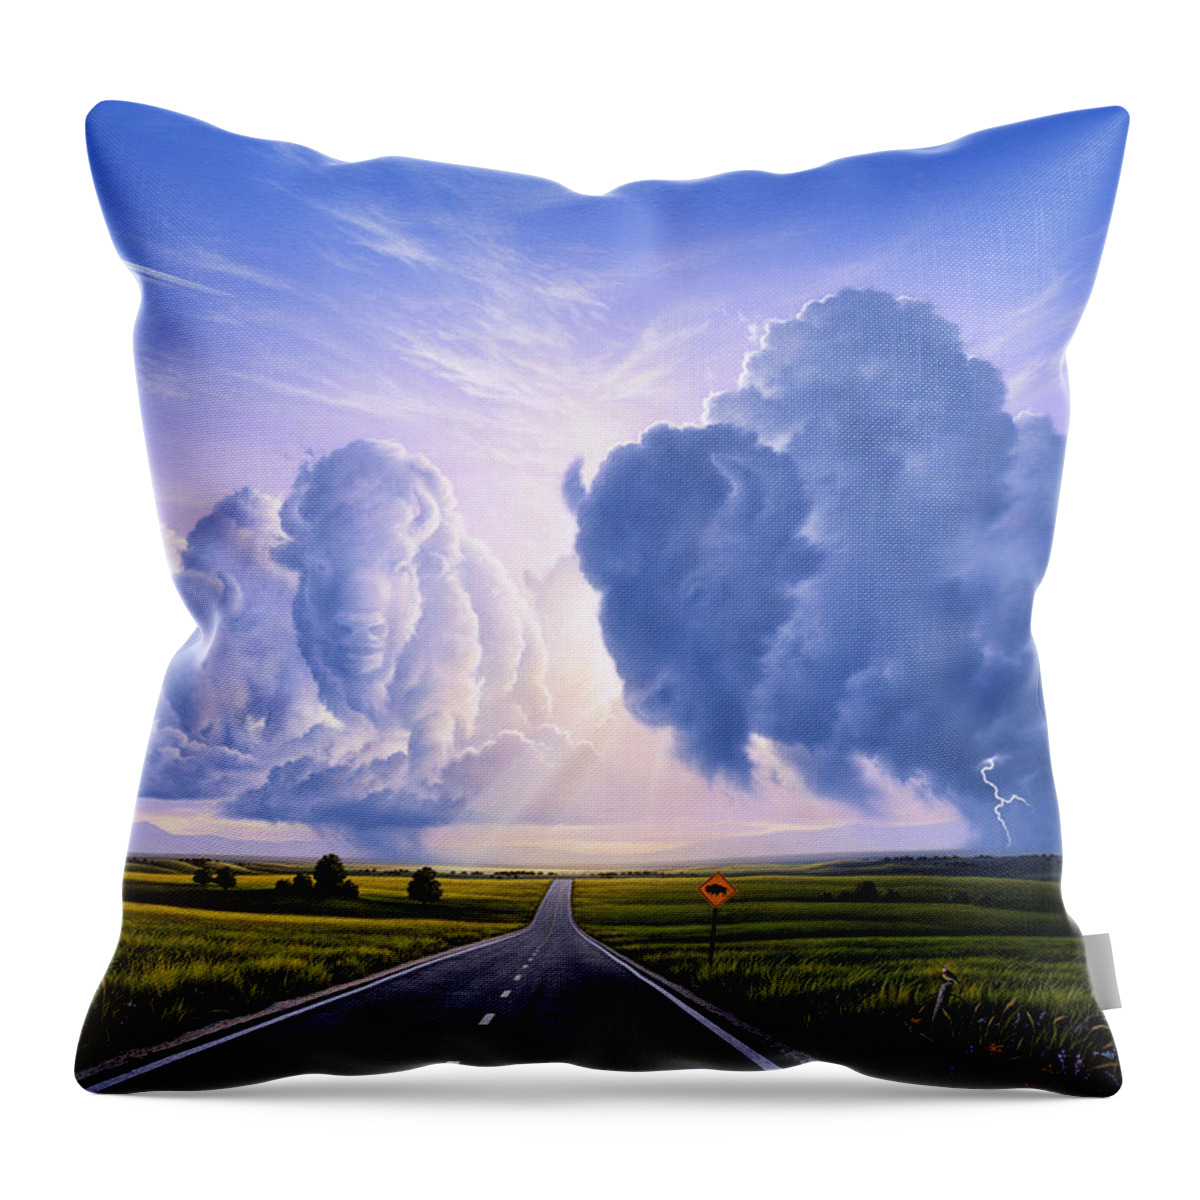 Nato Throw Pillow featuring the painting NATO Buffalo Crossing by Jerry LoFaro